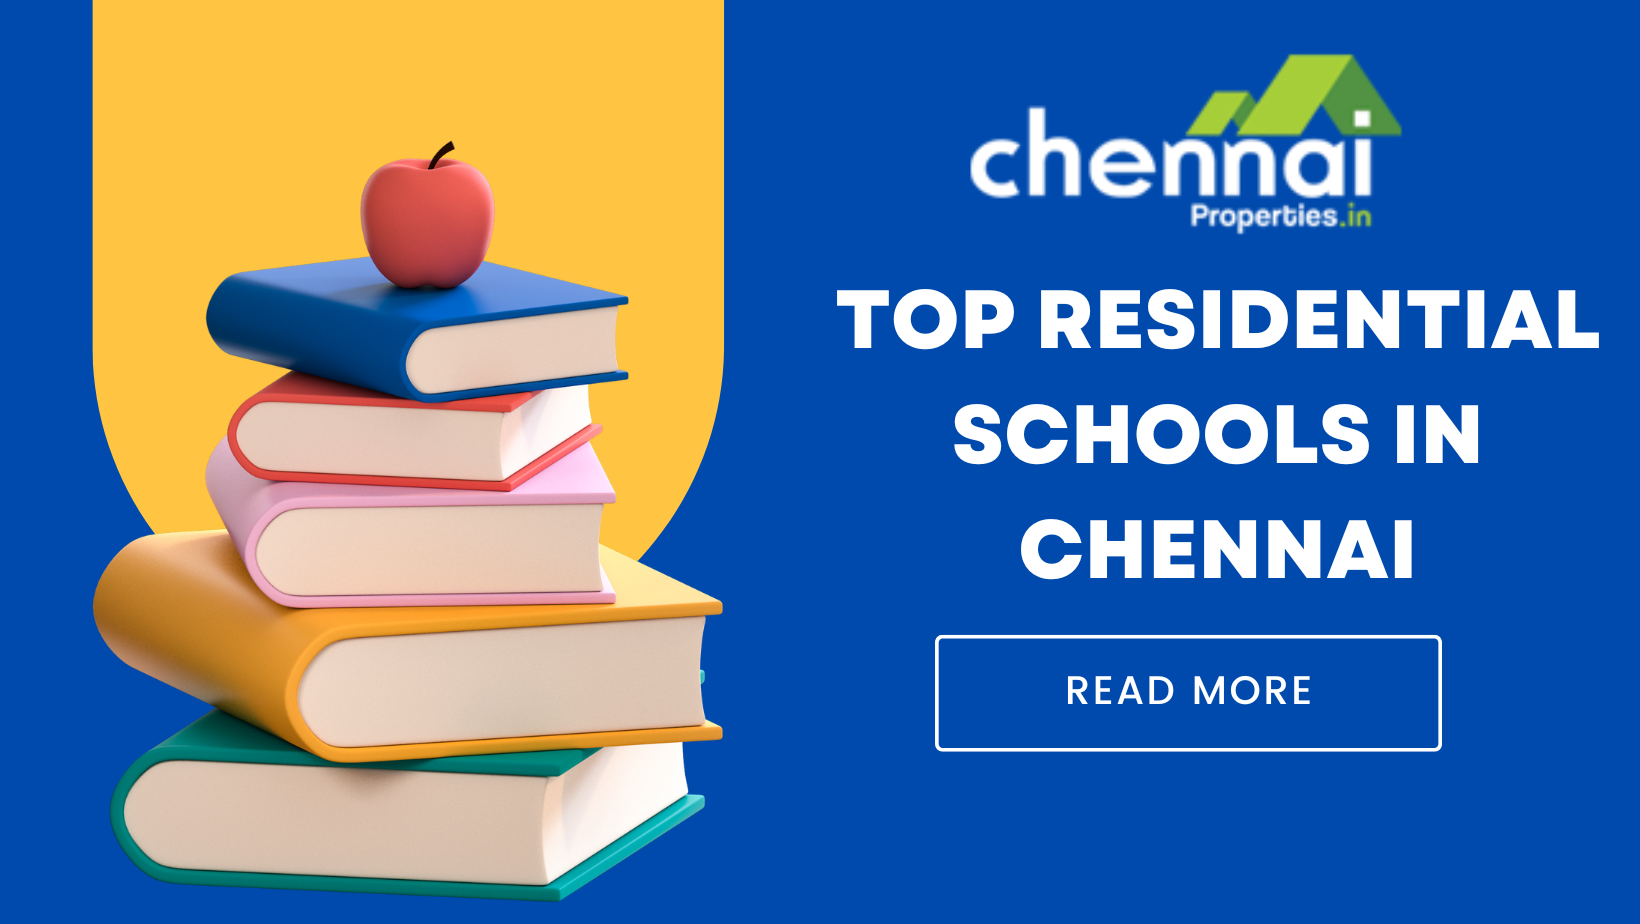 Top Residential Schools in Chennai